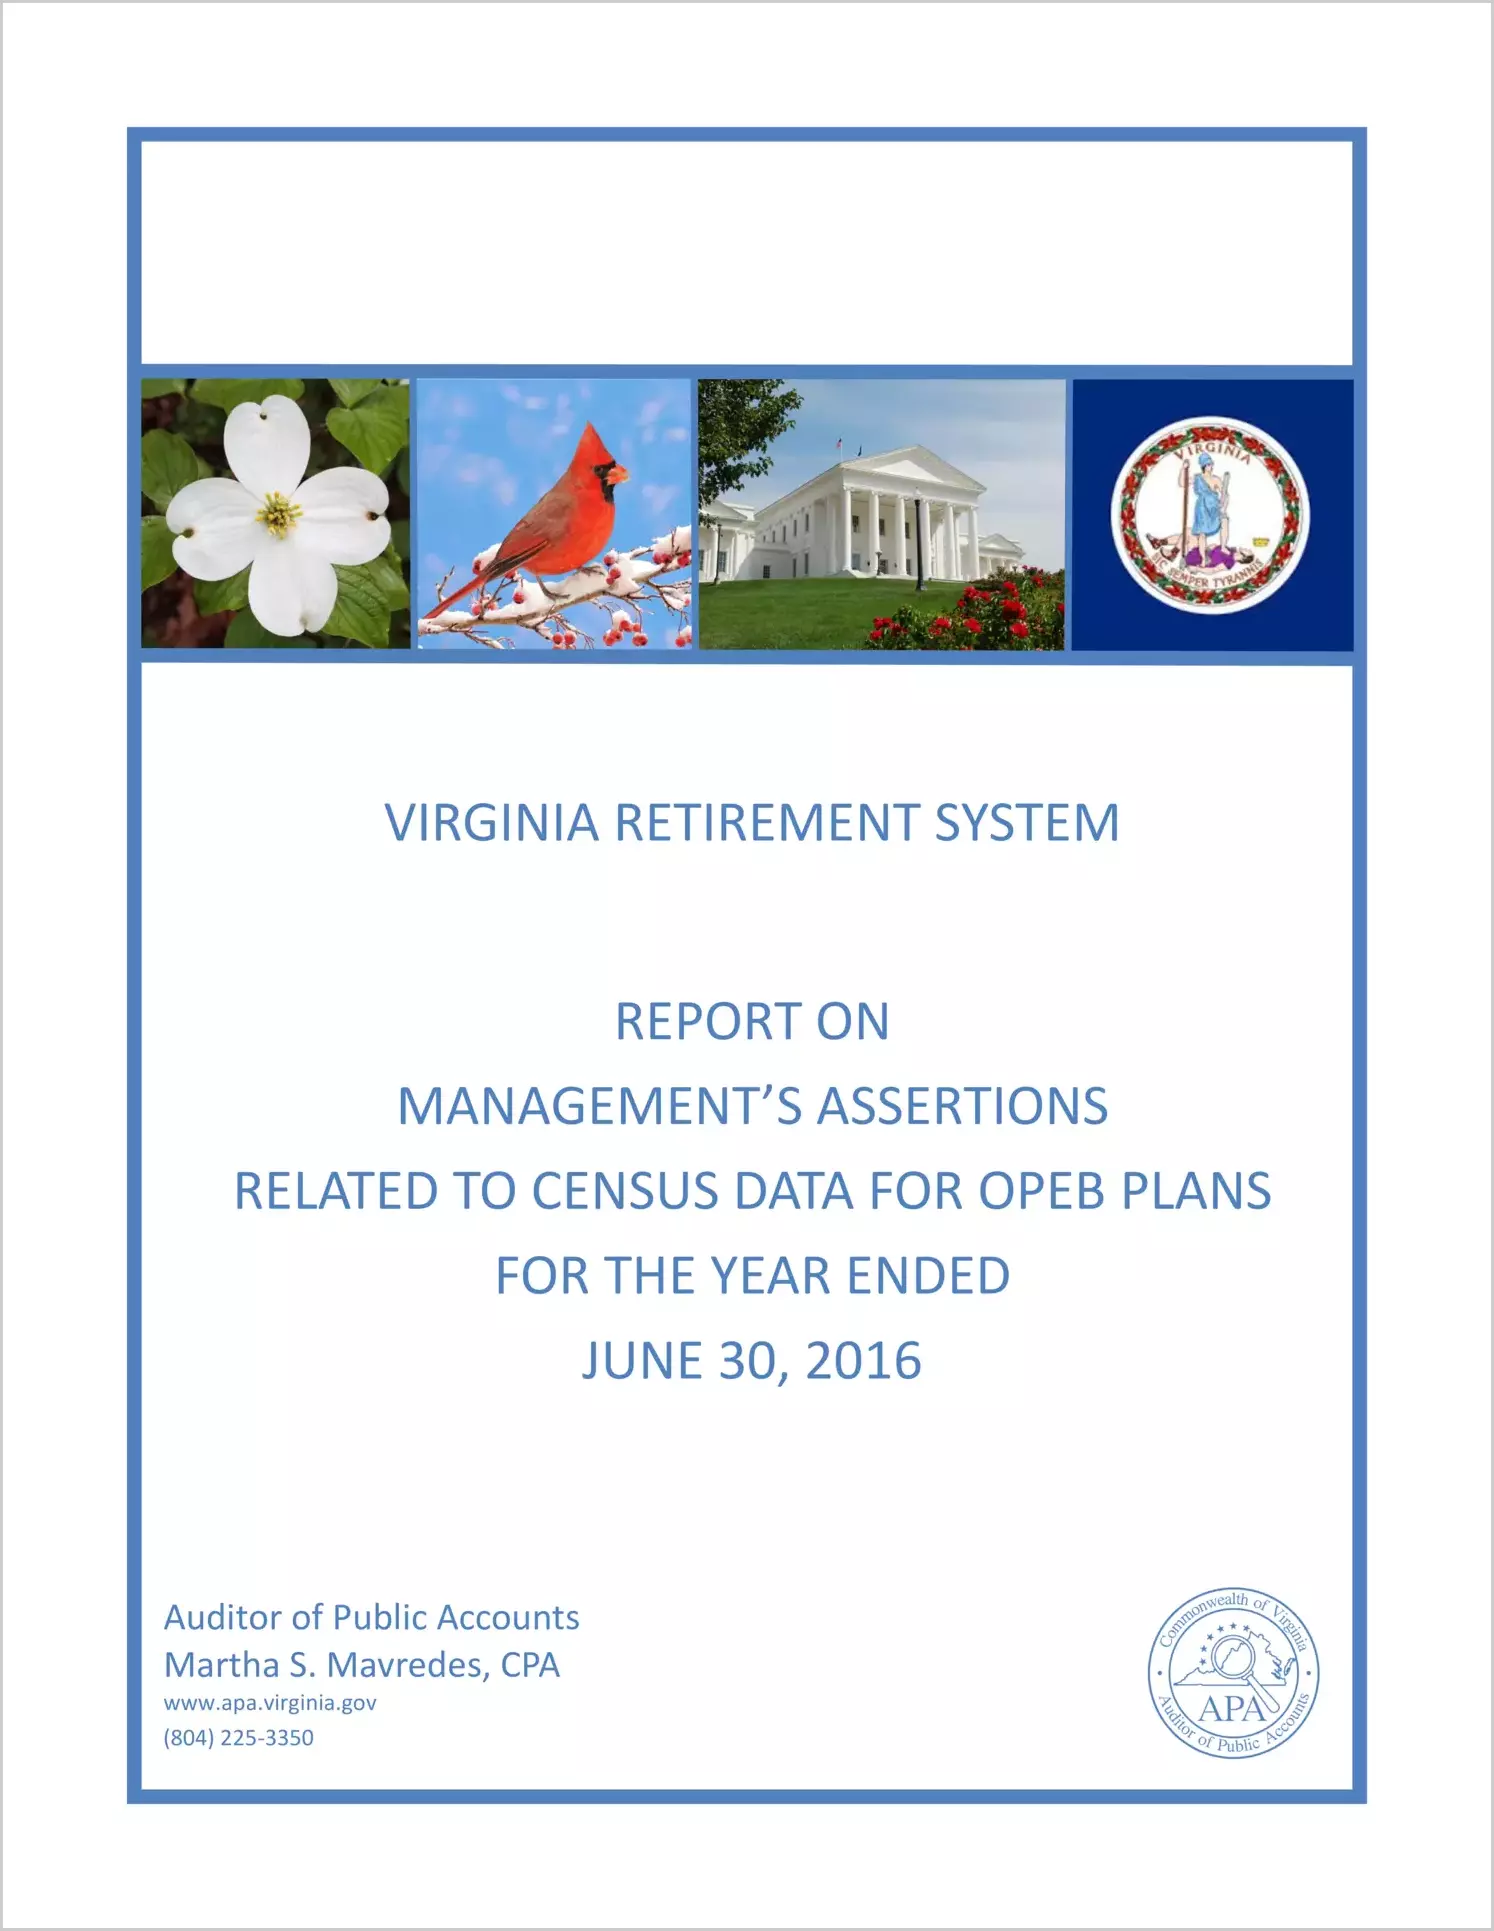 Virginia Retirement System report on Management's Assertions Related to Census Data for OPEB Plans for the year ended June 30, 2016